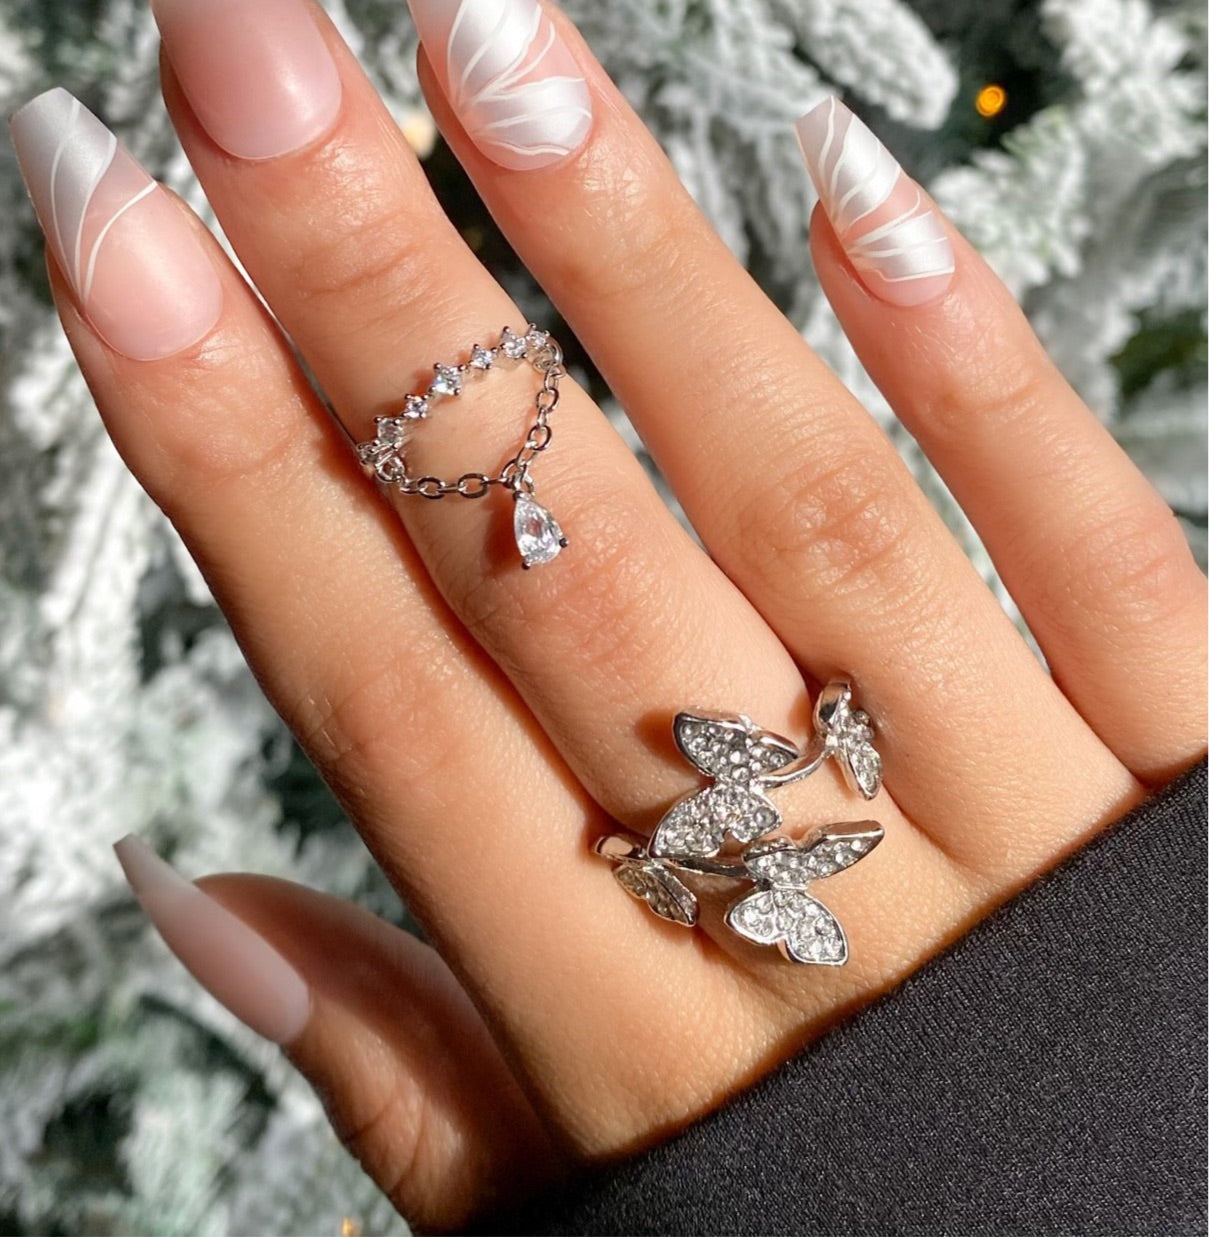 Looking for Louis Vuitton fairytale set rings